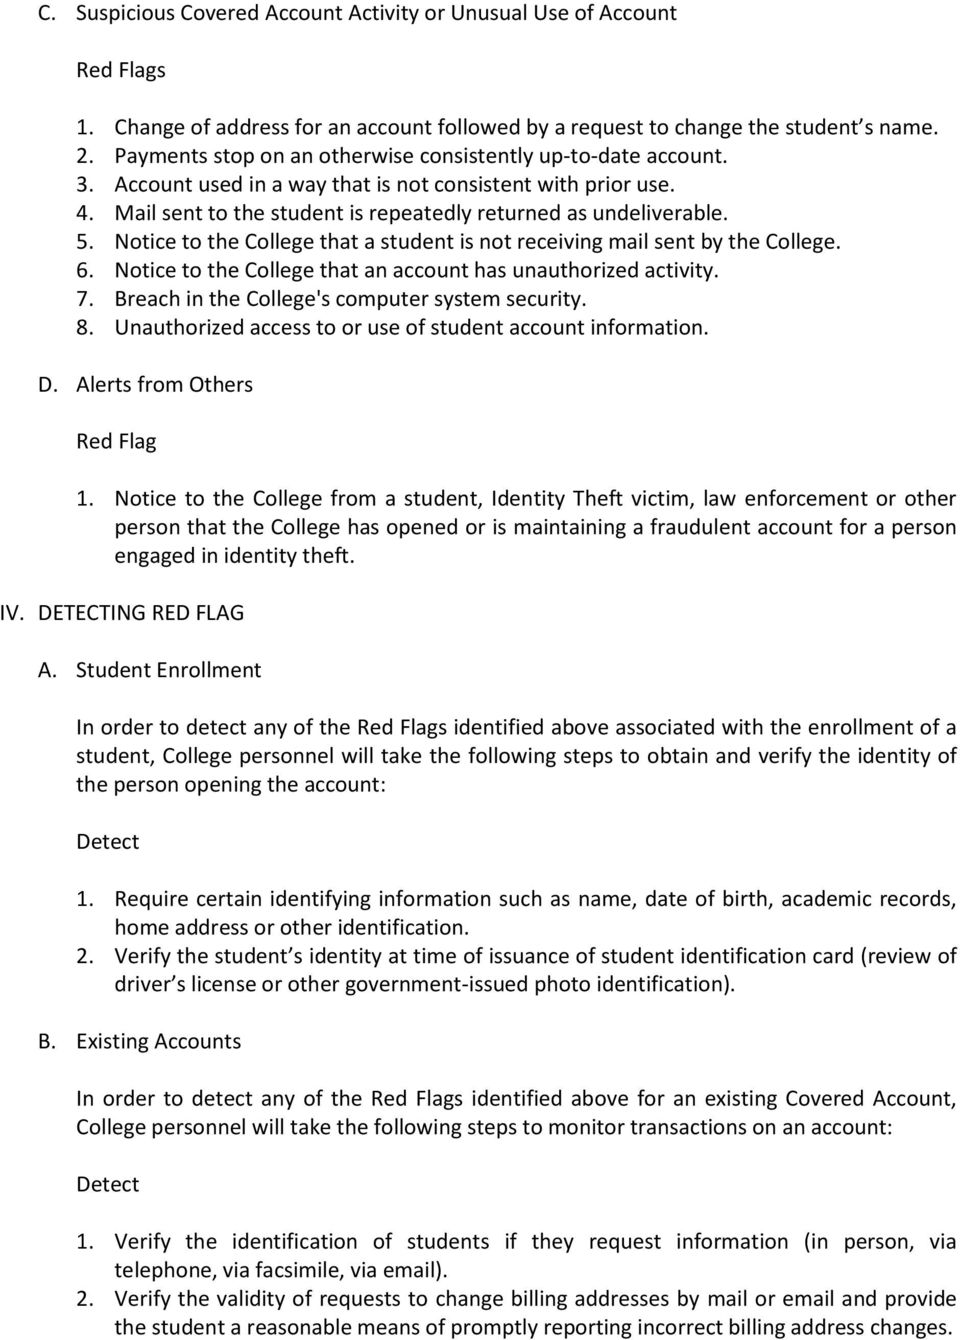 Notice to the College that a student is not receiving mail sent by the College. 6. Notice to the College that an account has unauthorized activity. 7. Breach in the College's computer system security.